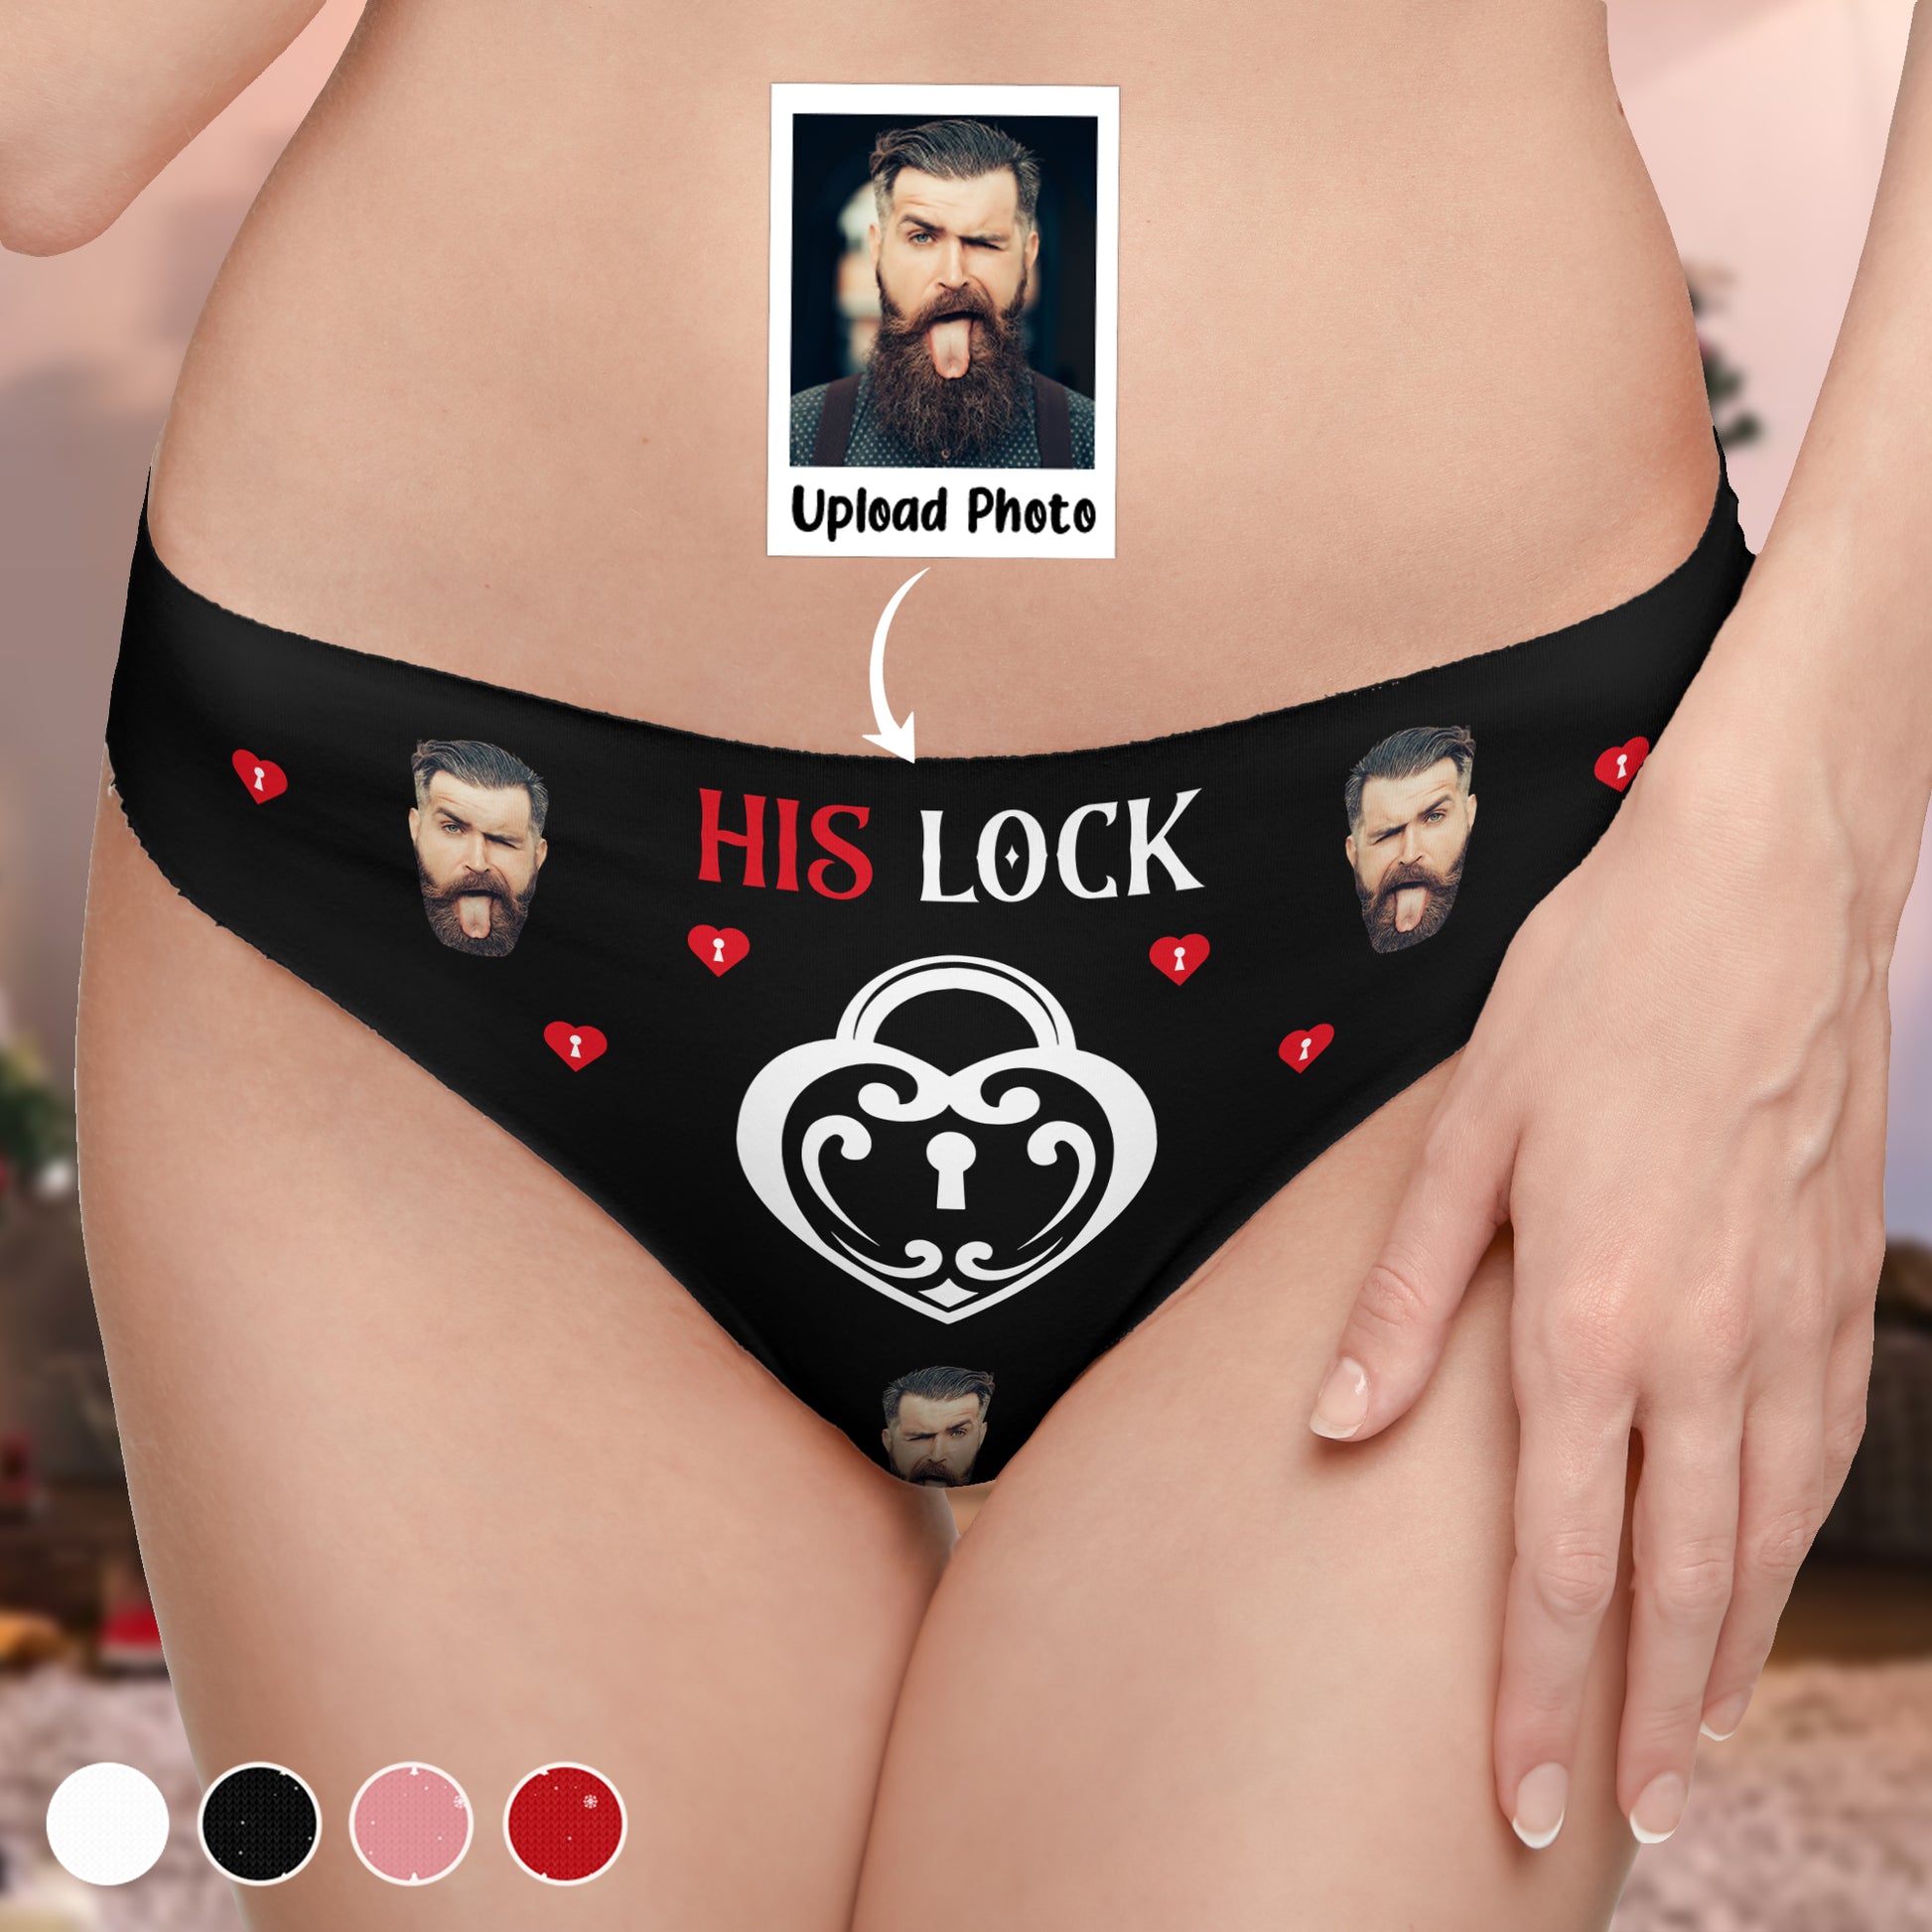 His Lock Her Key - Personalized Photo Couple Matching Underwear